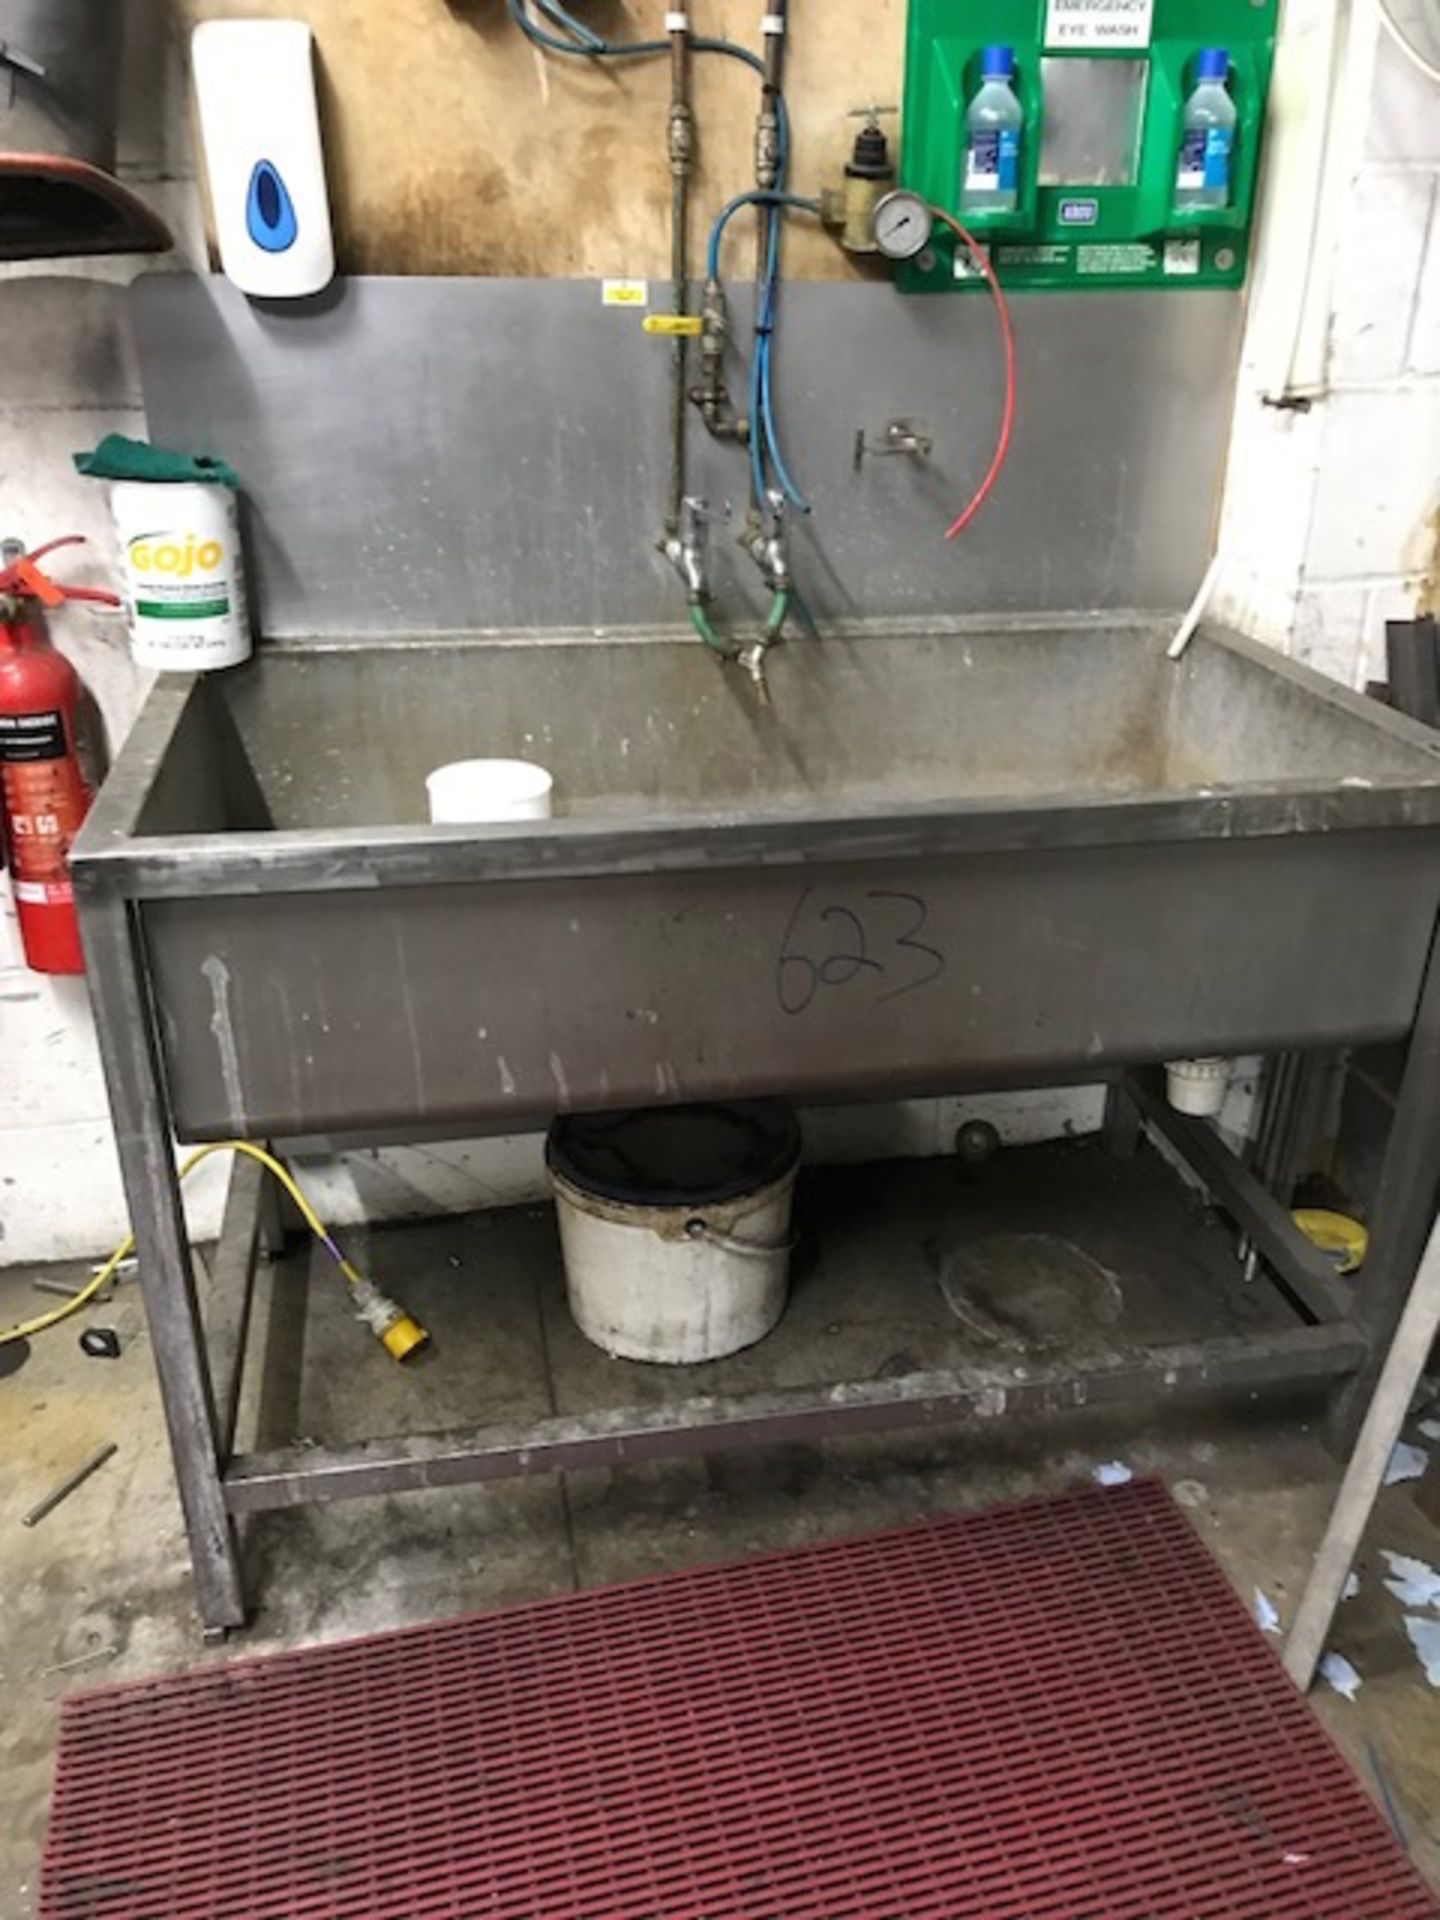 Large S/s Sink. Lift out charge £10